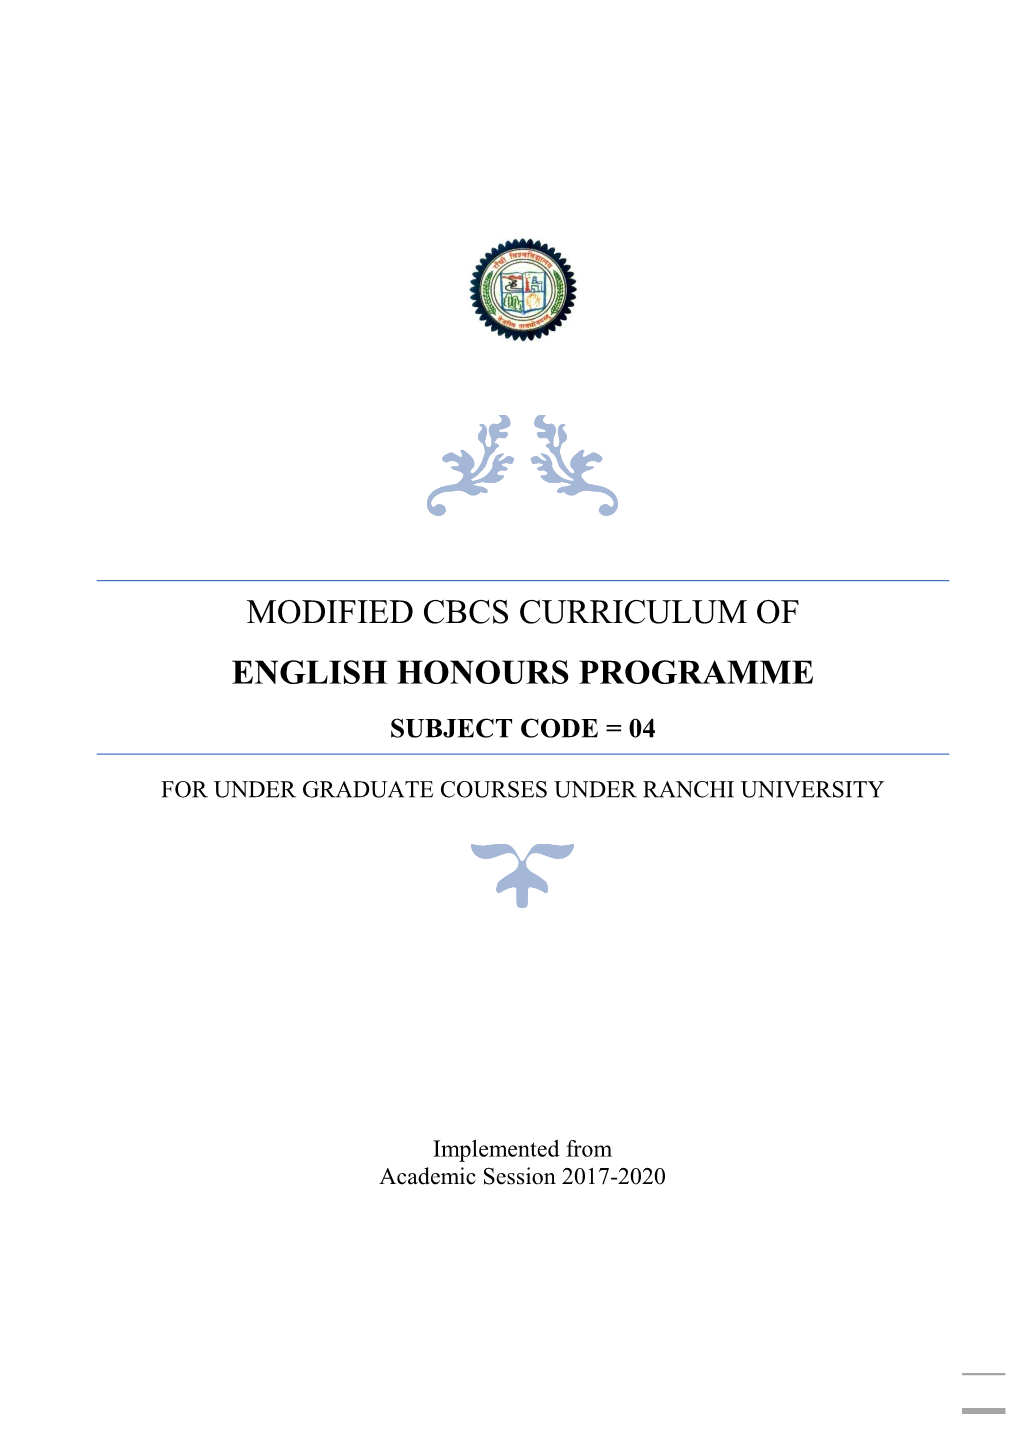 Modified Cbcs Curriculum of English Honours Programme Subject Code = 04